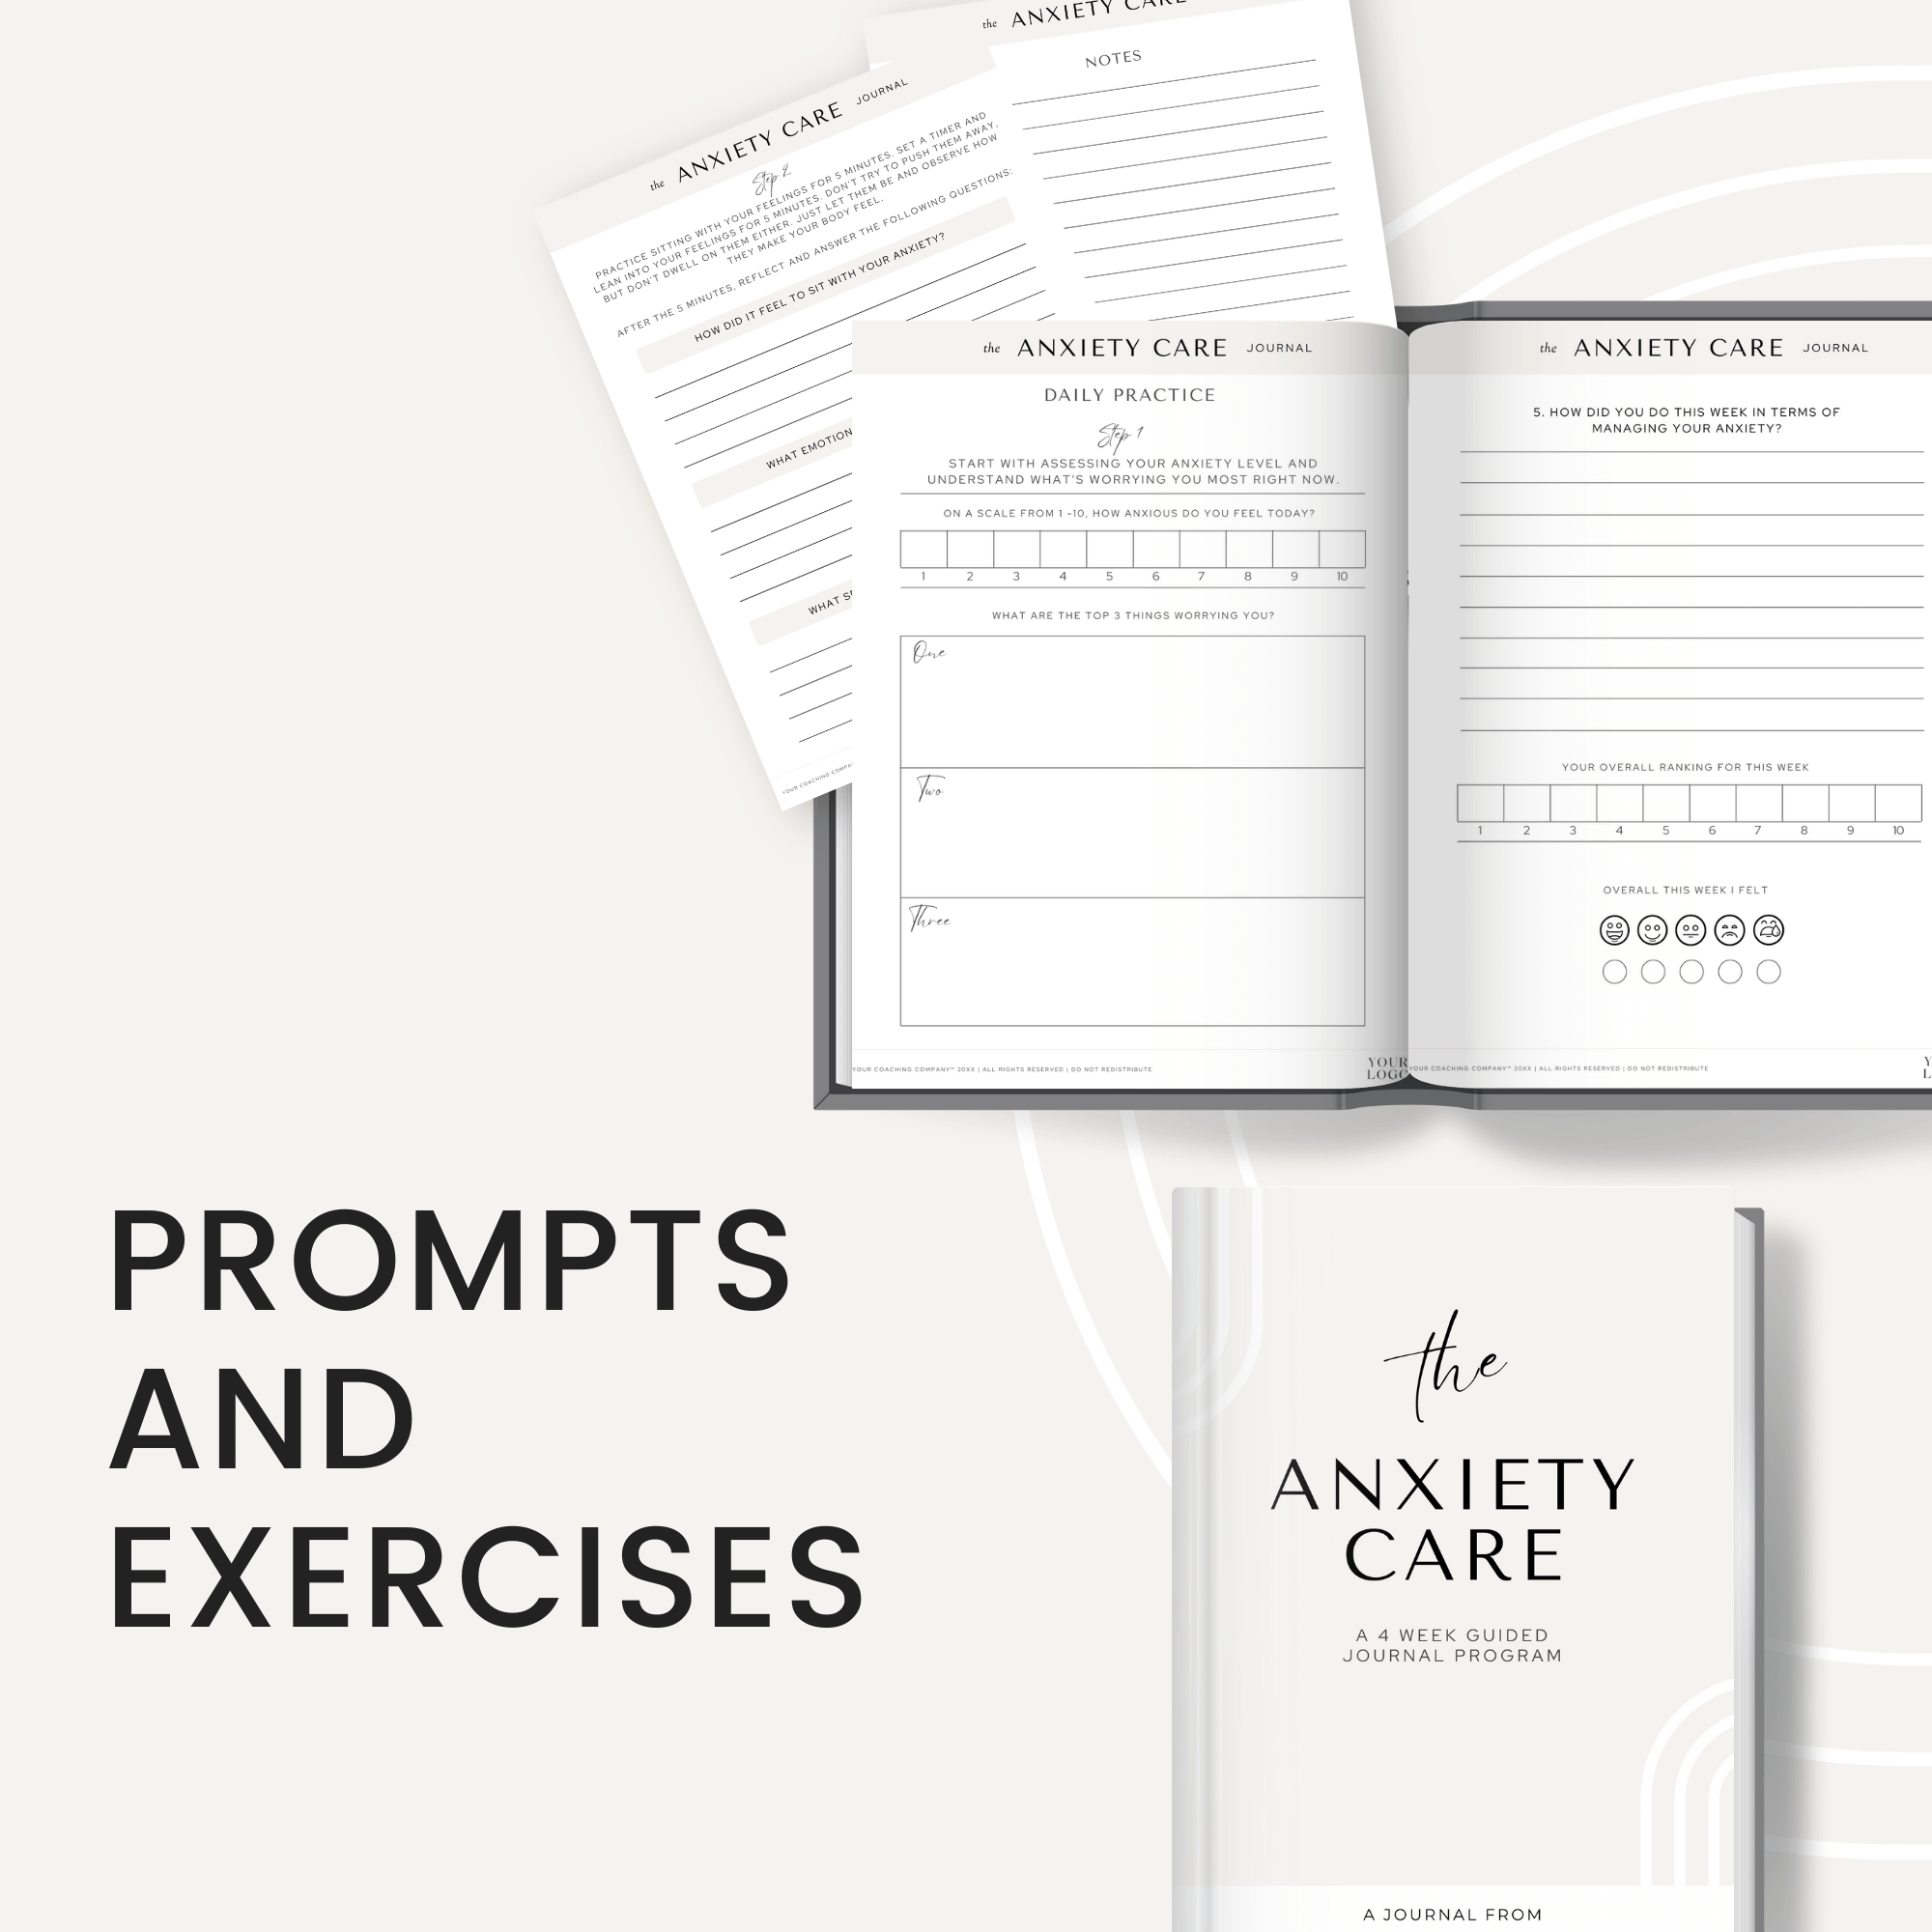 Anxiety Care Journal Prompts and Exercises